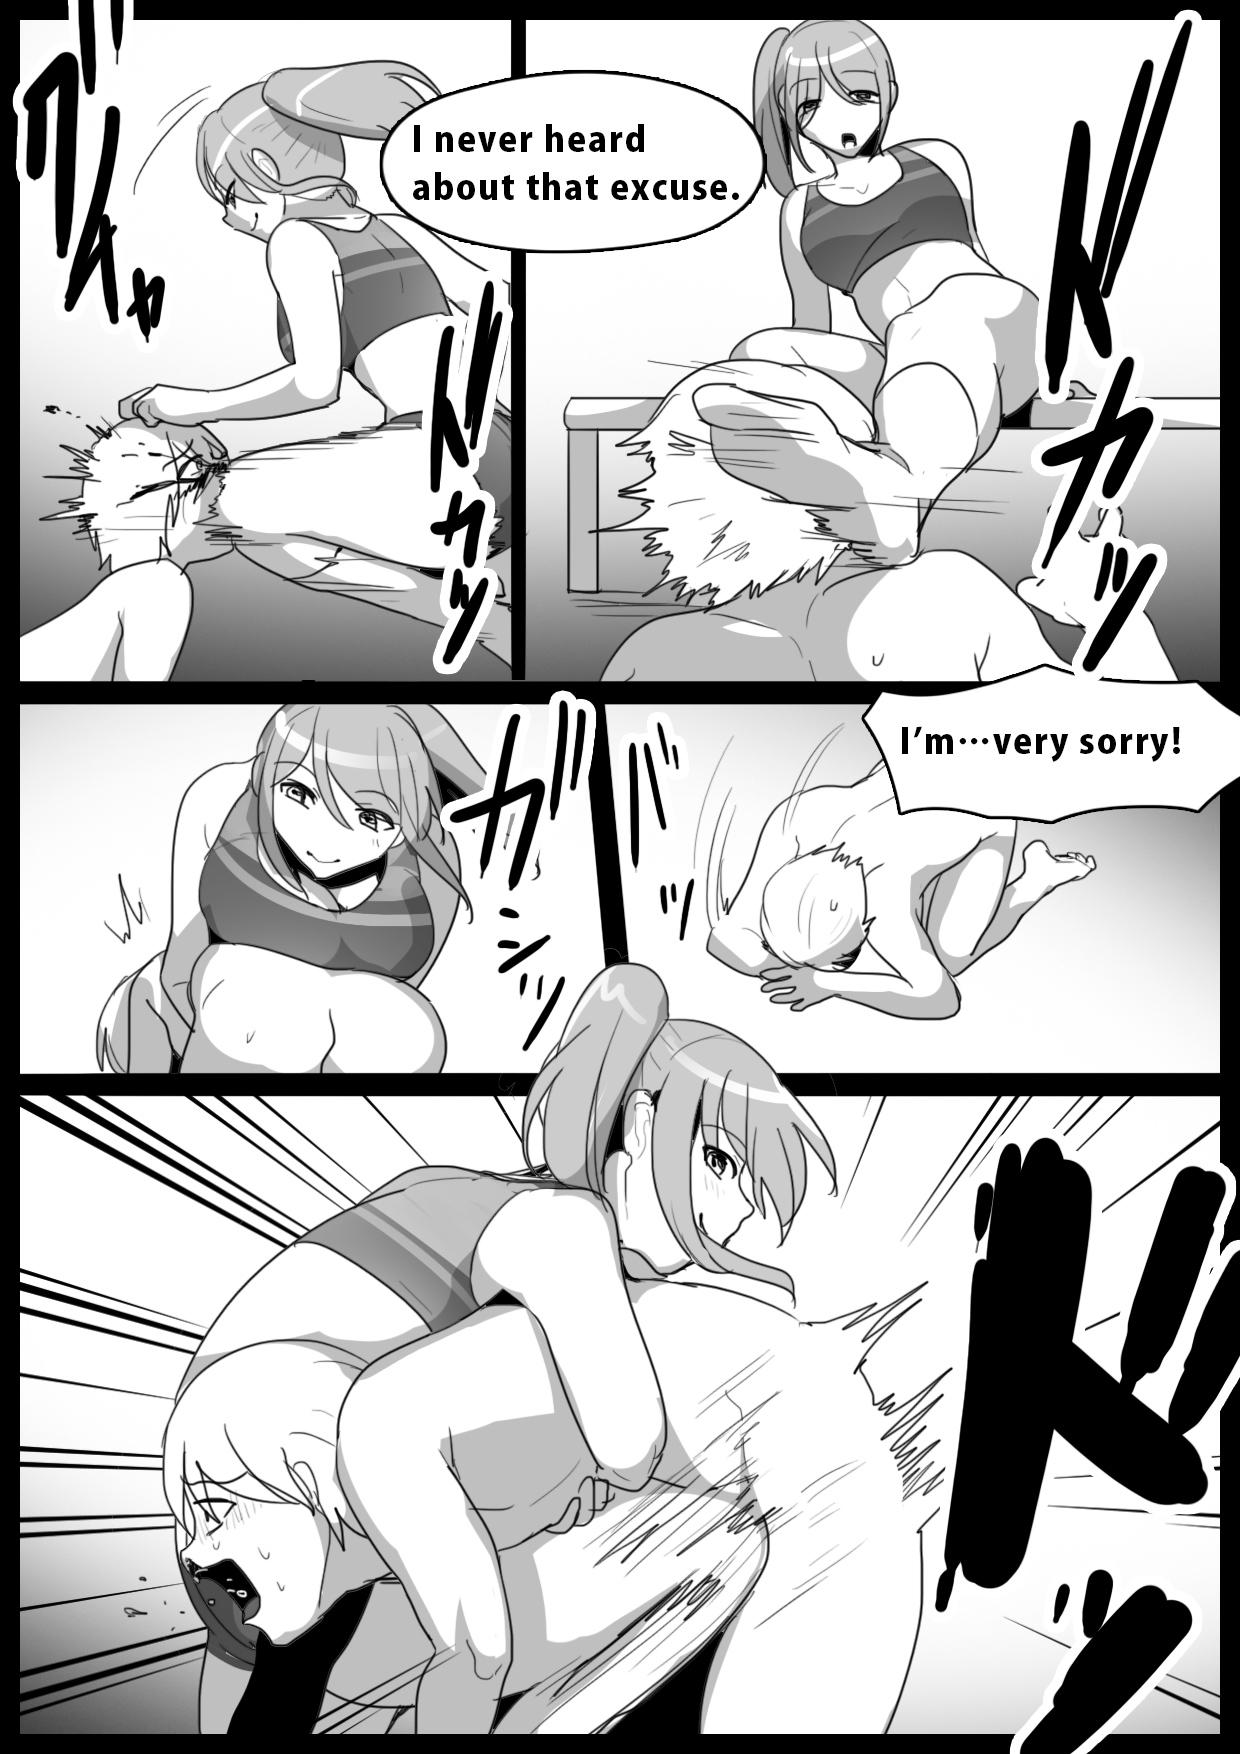 Huge Cock Spin-Off of Girls Beat by Rie – Original Wet Cunts - Page 1